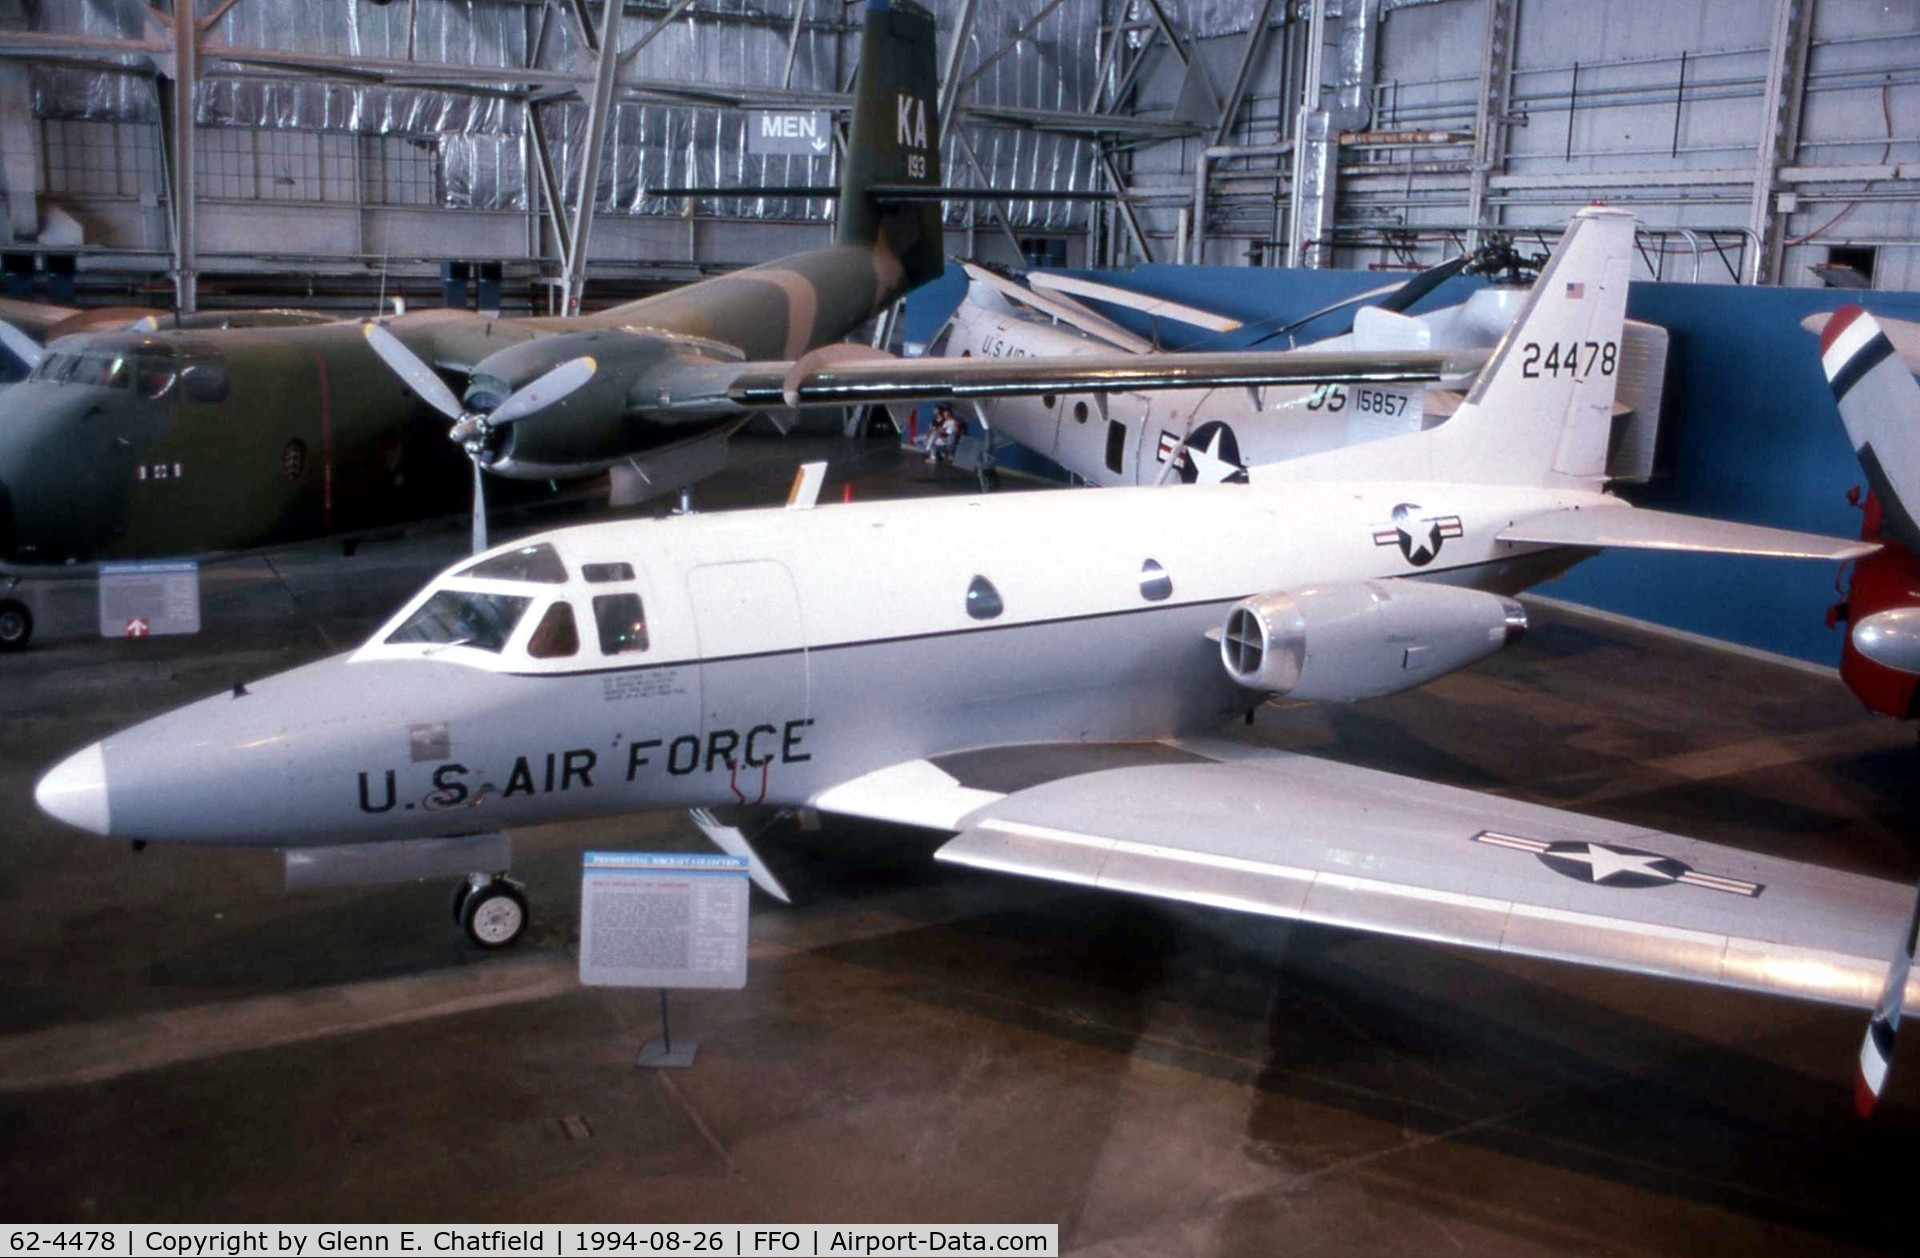 62-4478, 1962 North American T-39A Sabreliner Sabreliner C/N 276-31, CT-39A at the National Museum of the U.S. Air Force